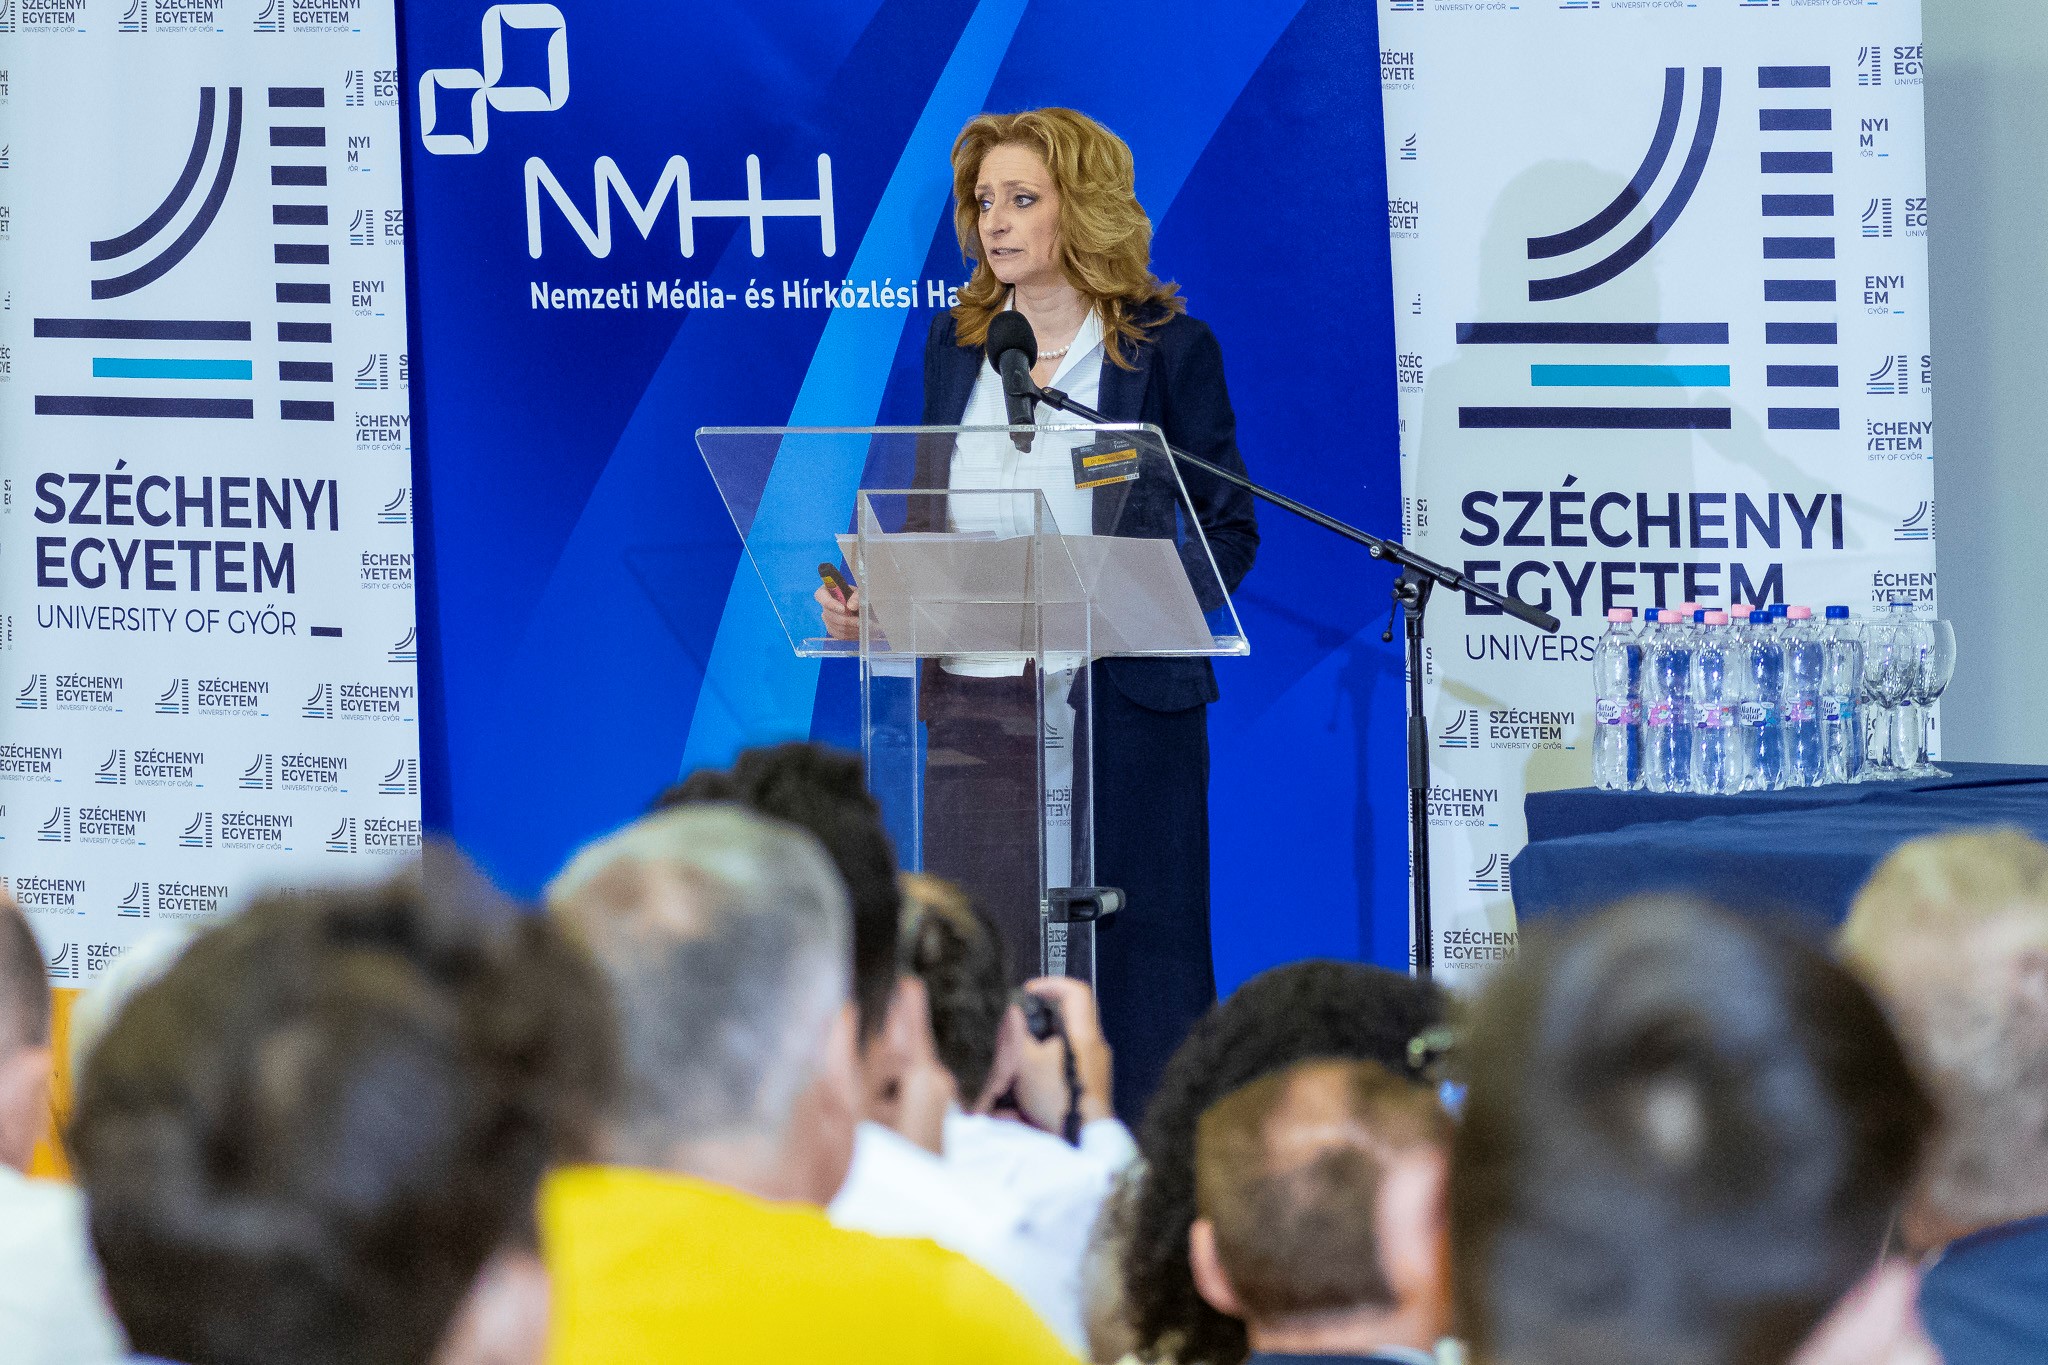 The participants of the plenary session of the conference were also able to listen to the presentation of Dr. Orsolya Ferencz, Ministerial Commissioner for Space Research of the Ministry of Foreign Affairs and Trade, entitled 